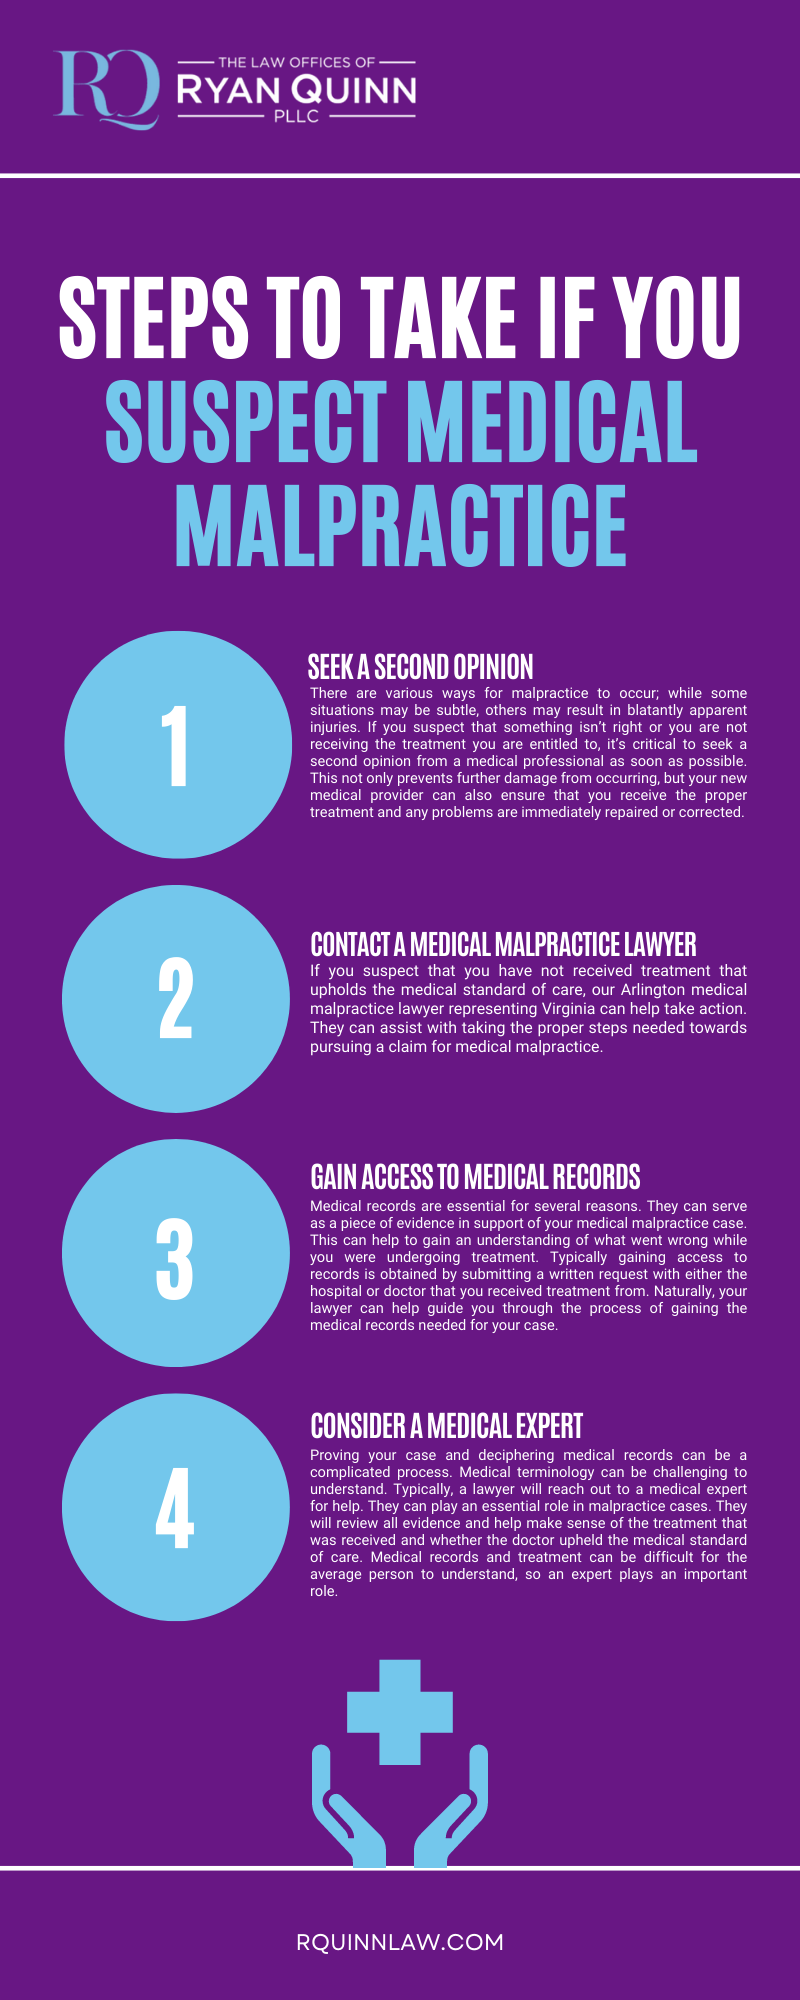 STEPS TO TAKE IF YOU SUSPECT MEDICAL MALPRACTICE INFOGRAPHIC